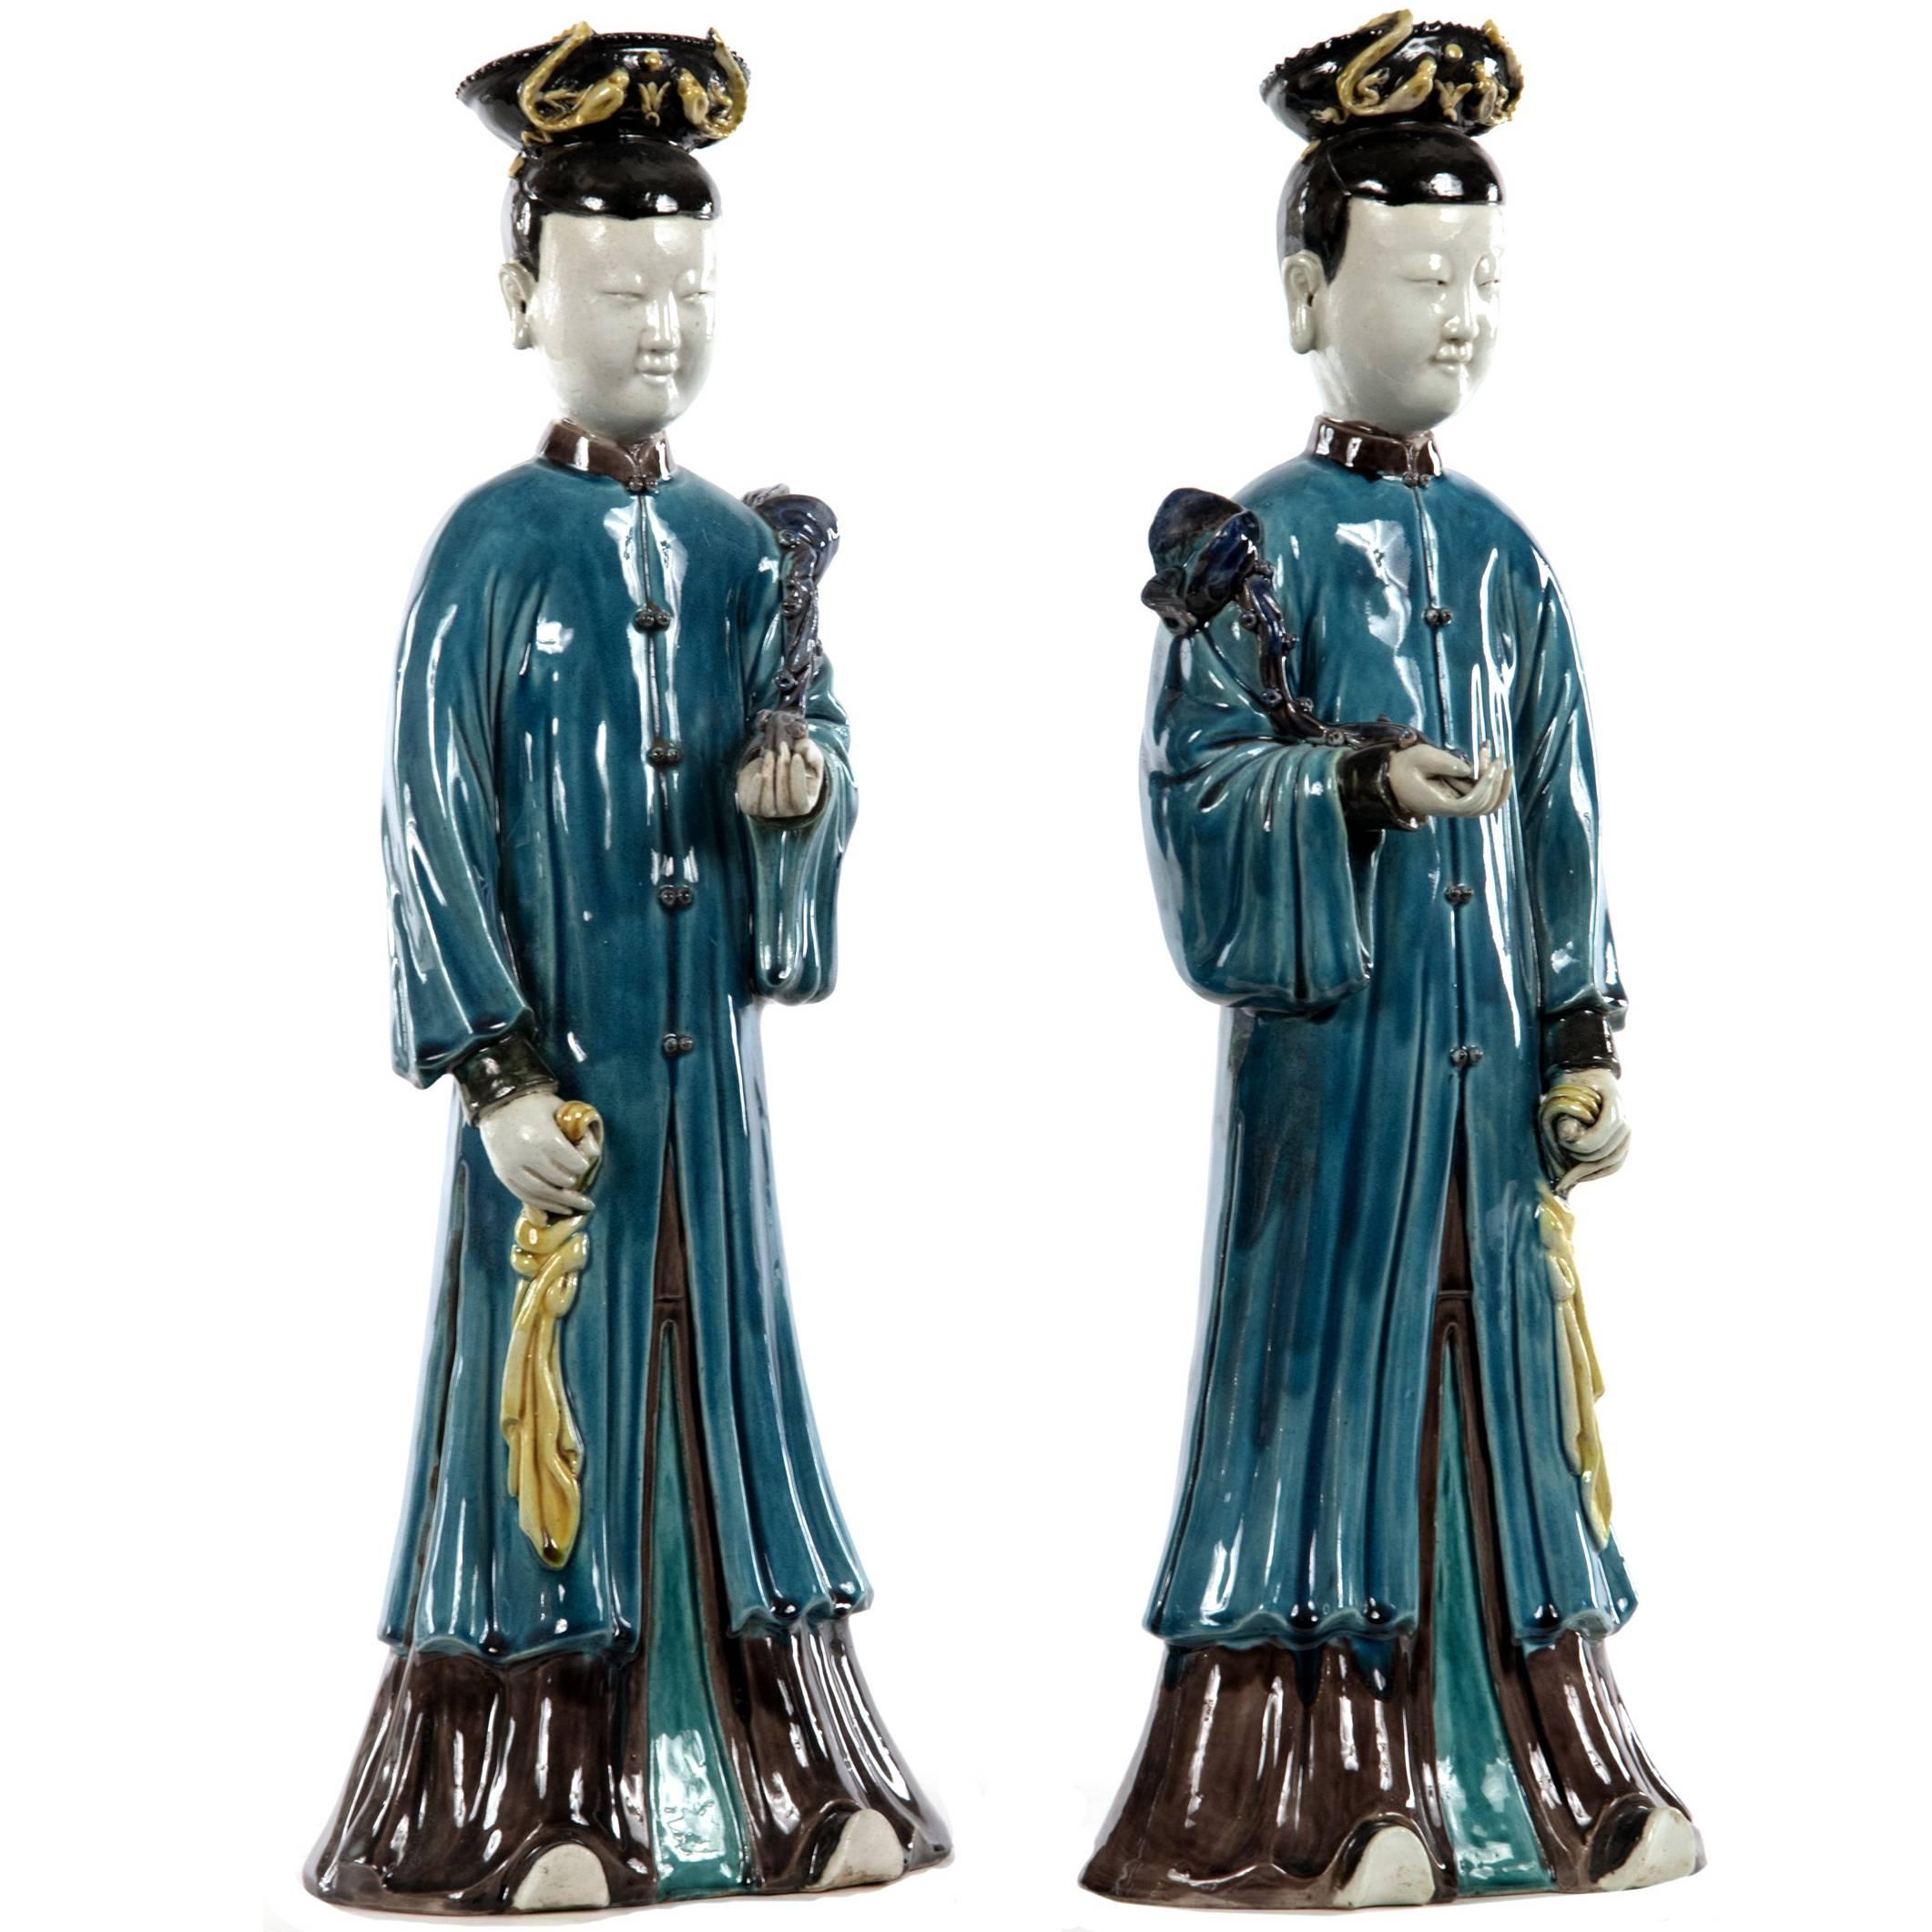 Pair of Porcelain Figurines of the Chinese Immortal God Lu